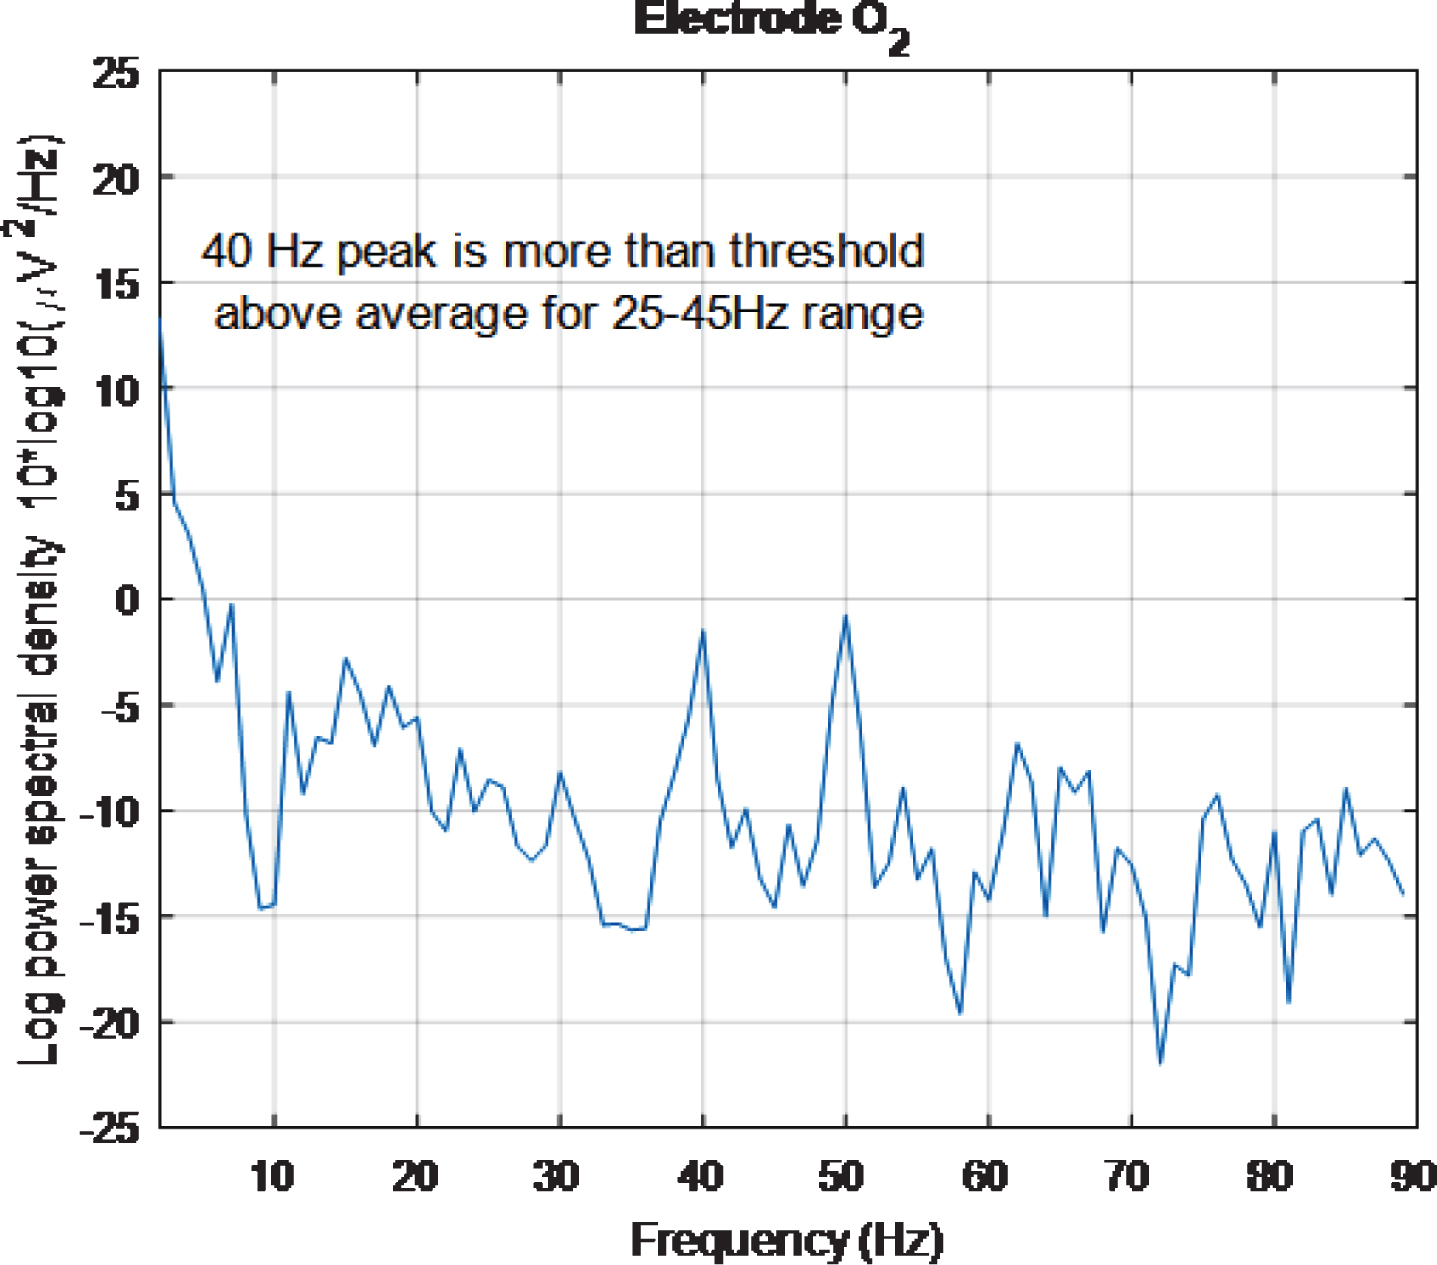 PSD for O2 electrode, for high intensity 40 Hz stimulus for healthy volunteer 3 using the first 2 s of data. The 40 Hz peak is evident and is of similar amplitude to the 50 Hz peak.